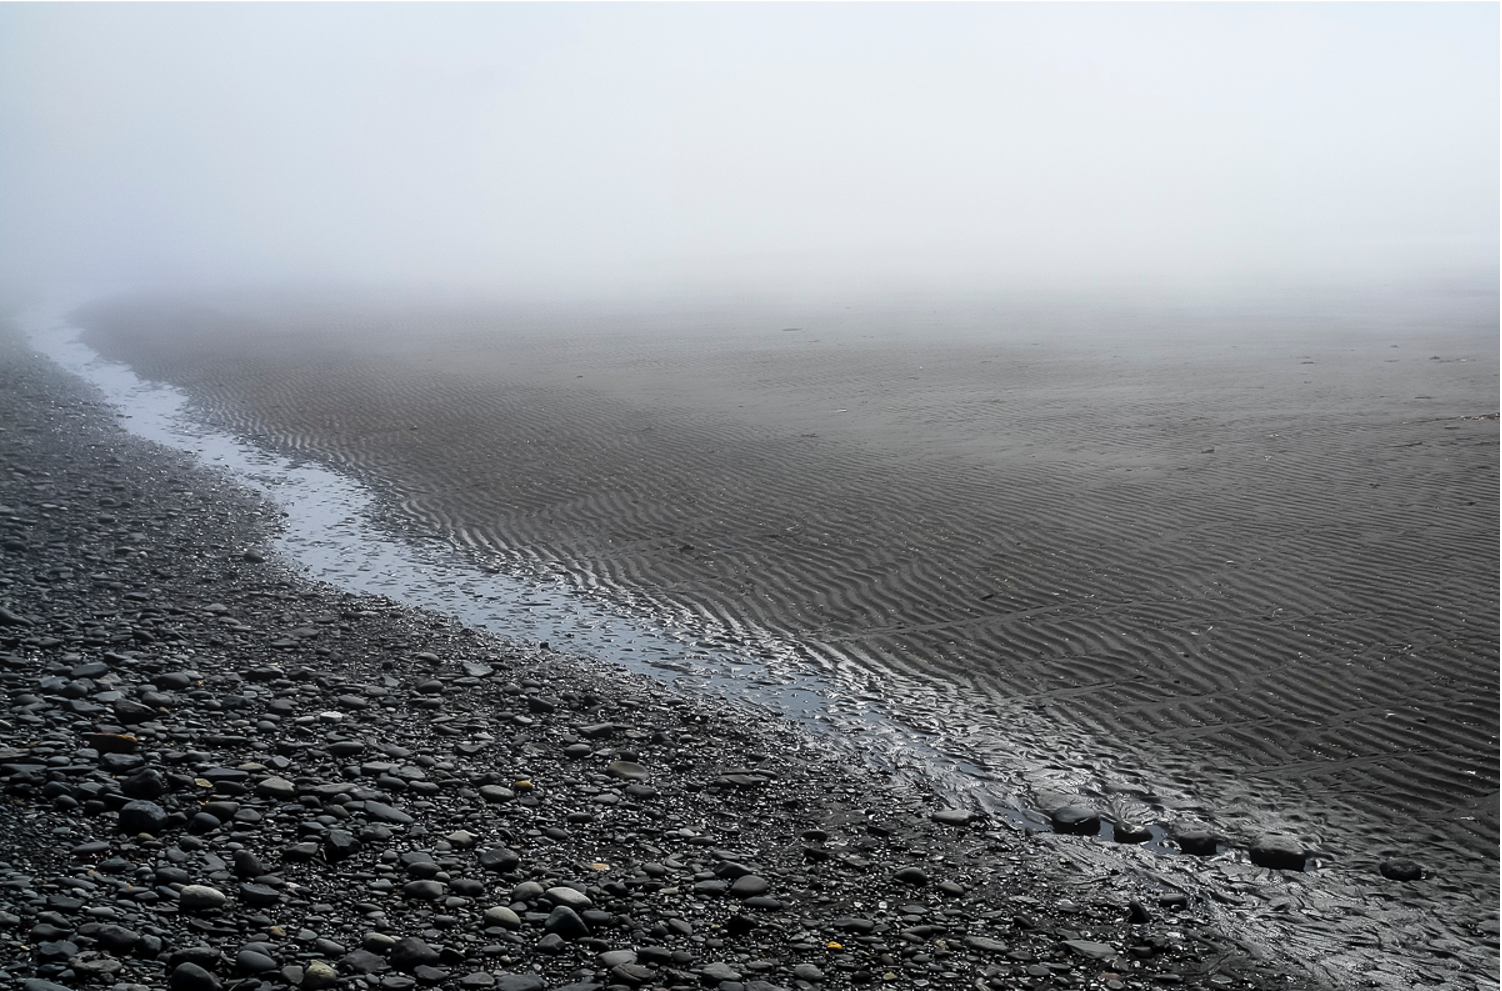 a rocky beach beach that leads into a sandy beach the day has fog and is gray. A line of water seems to seperate the rocky and sandy areas